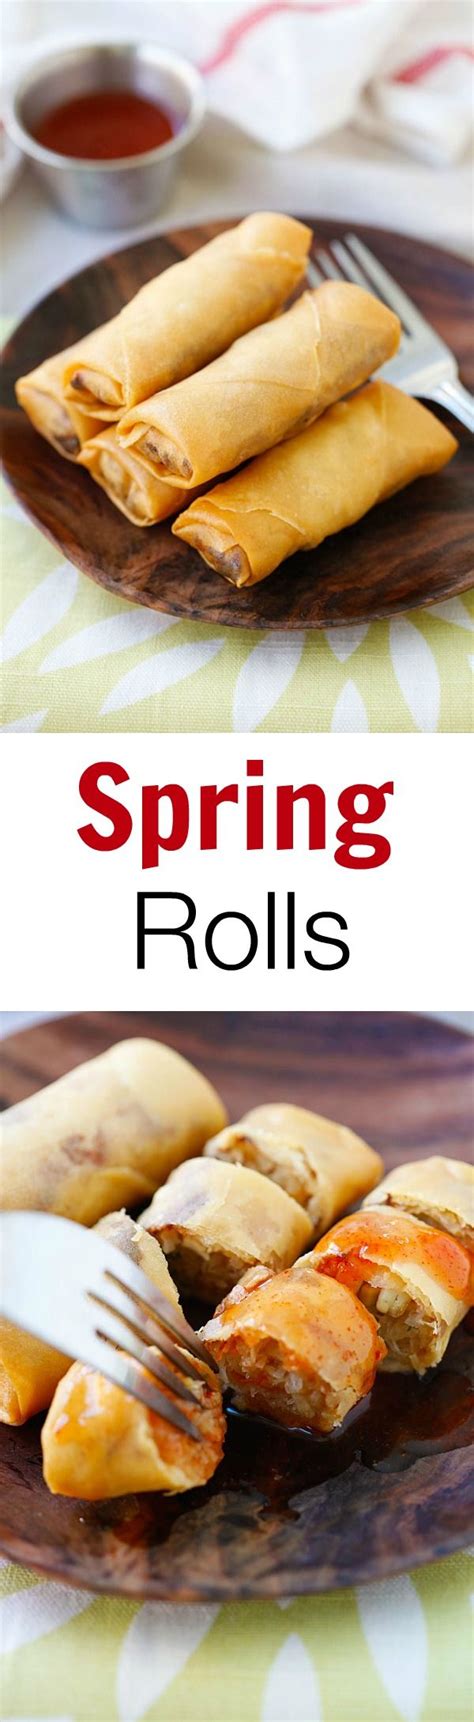 When the spring rolls are golden and crisp, remove from the oven. Fried Spring Rolls (Super Crispy Recipe) - Rasa Malaysia